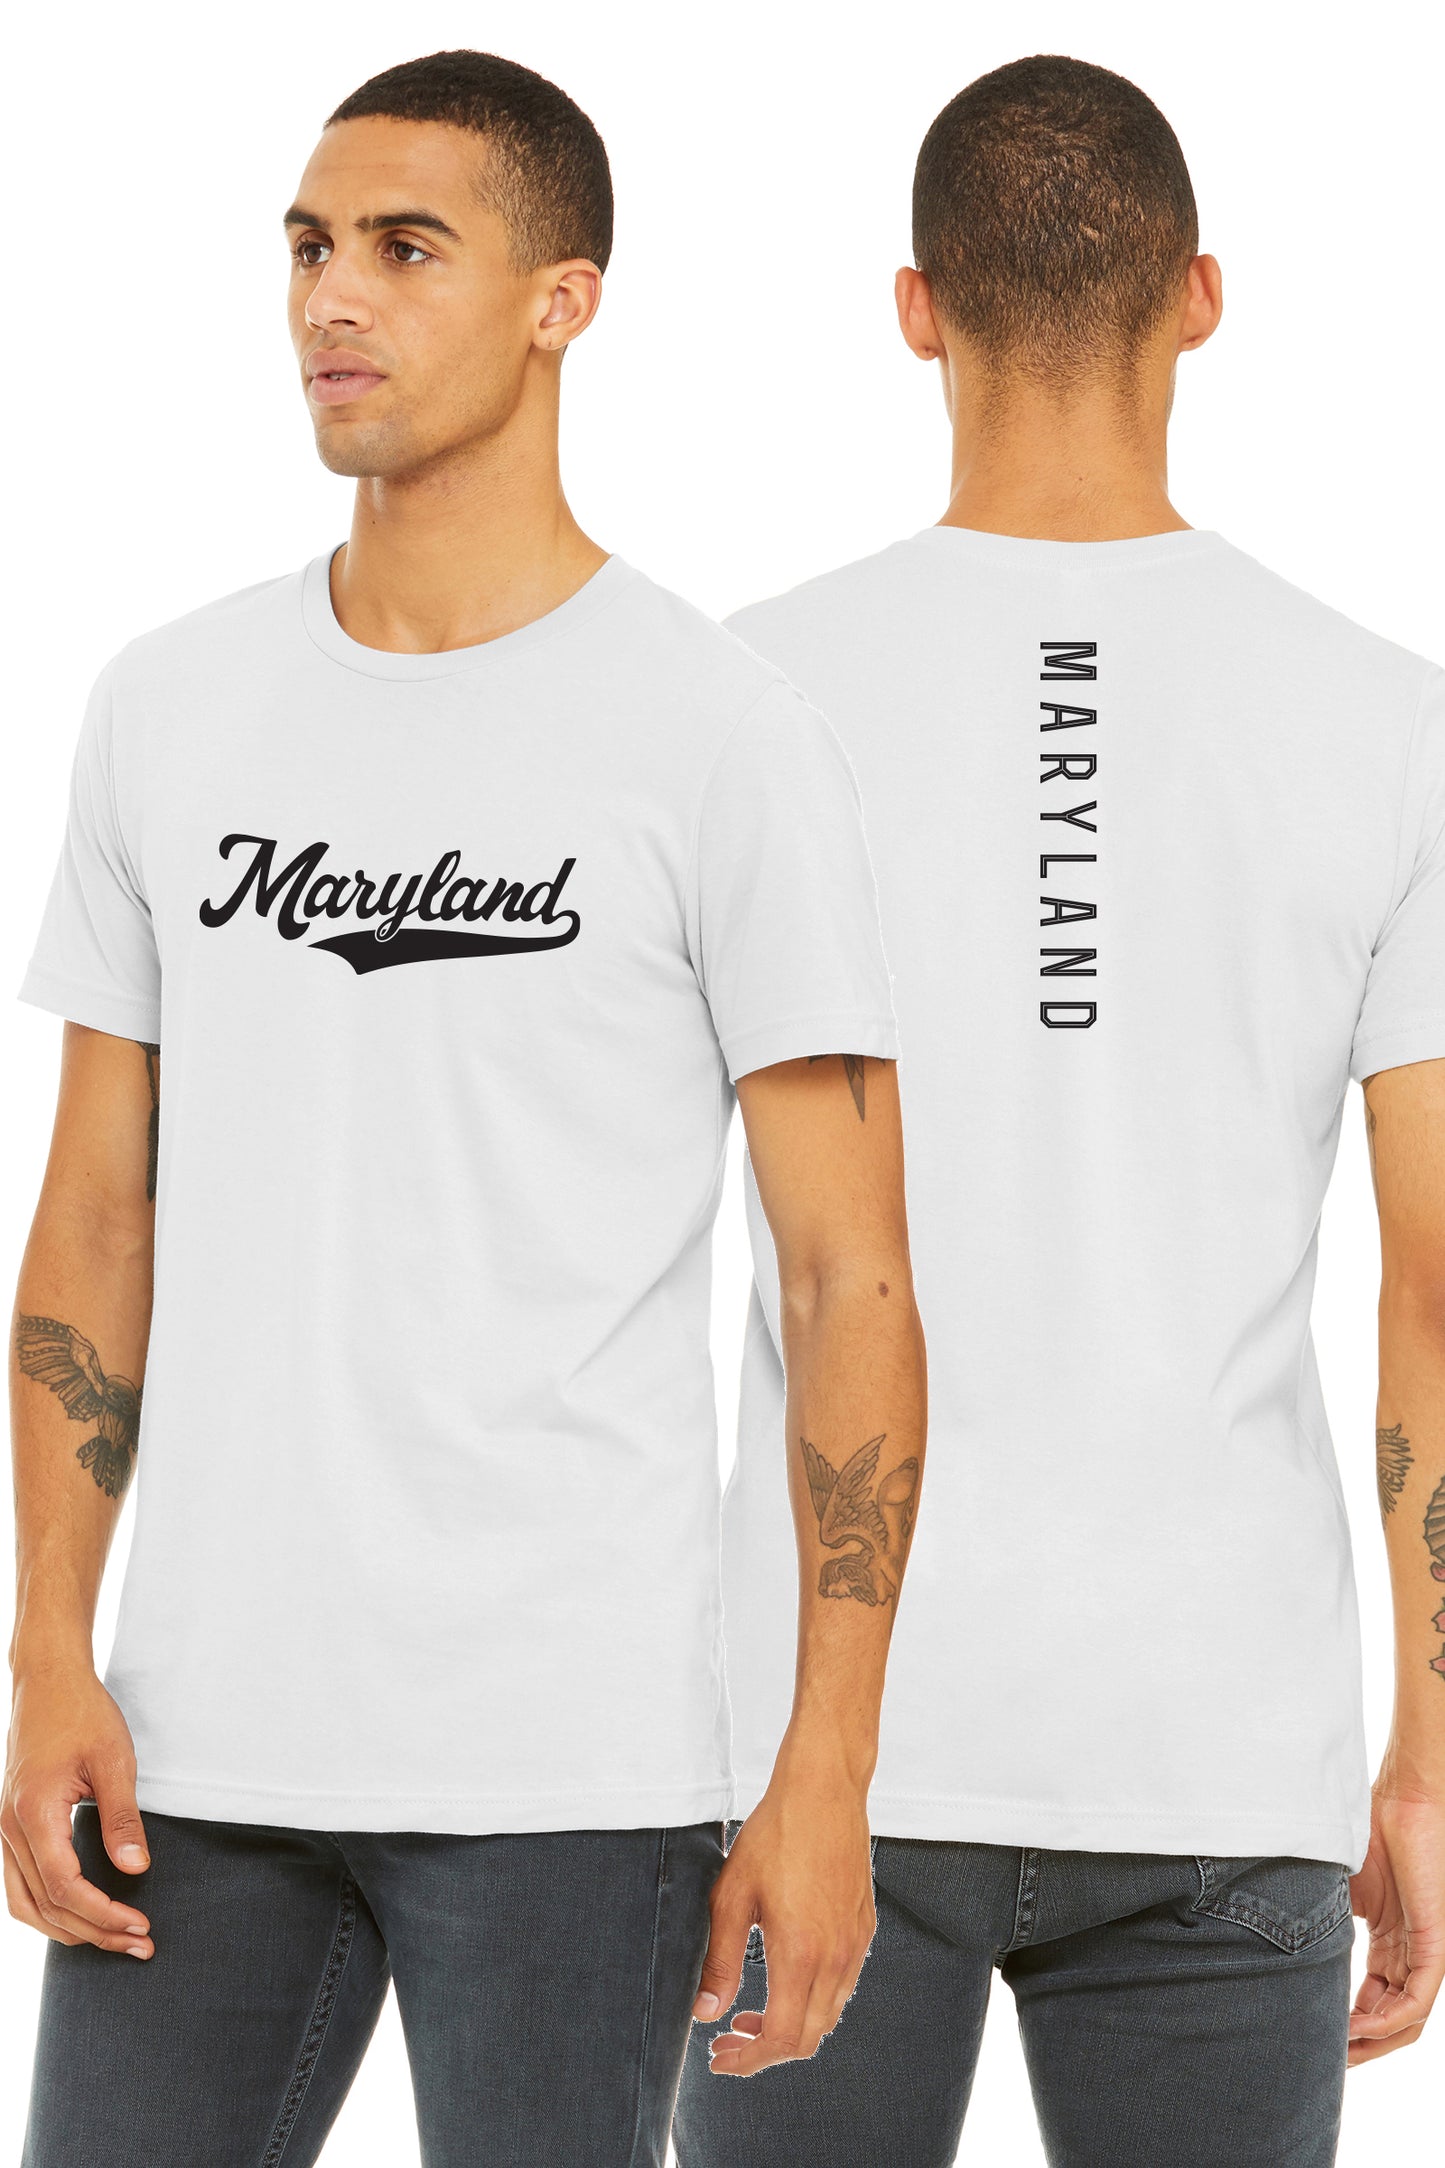 Daxton Adult Unisex Tshirt Maryland Script with Vertical on the Back